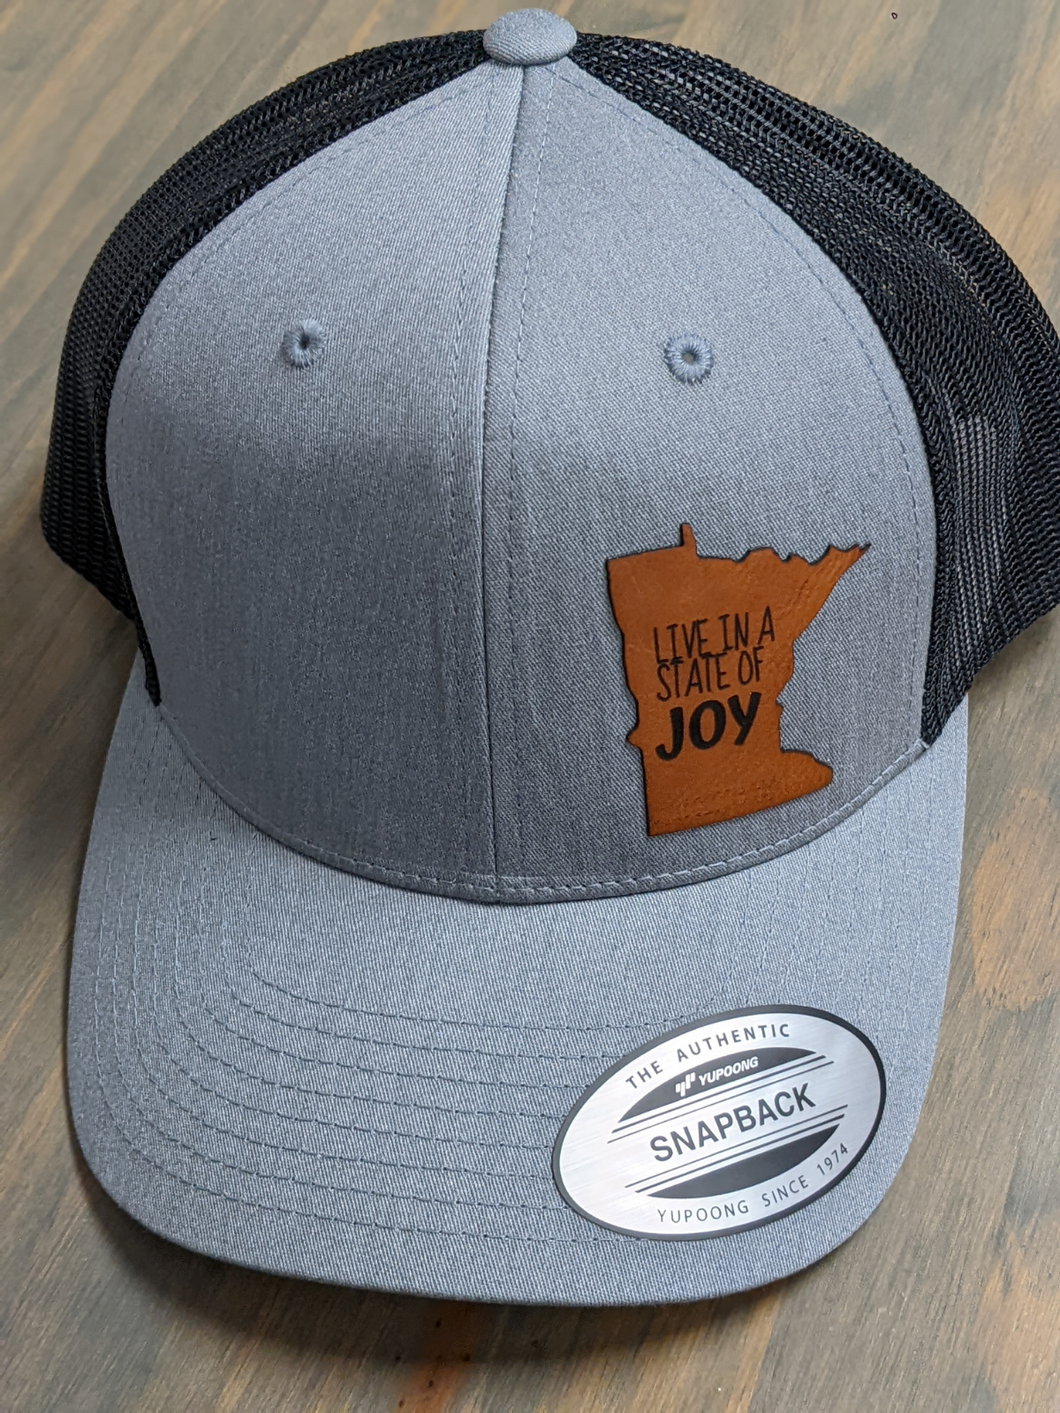 State of Joy MN hats (adult and youth sizes)